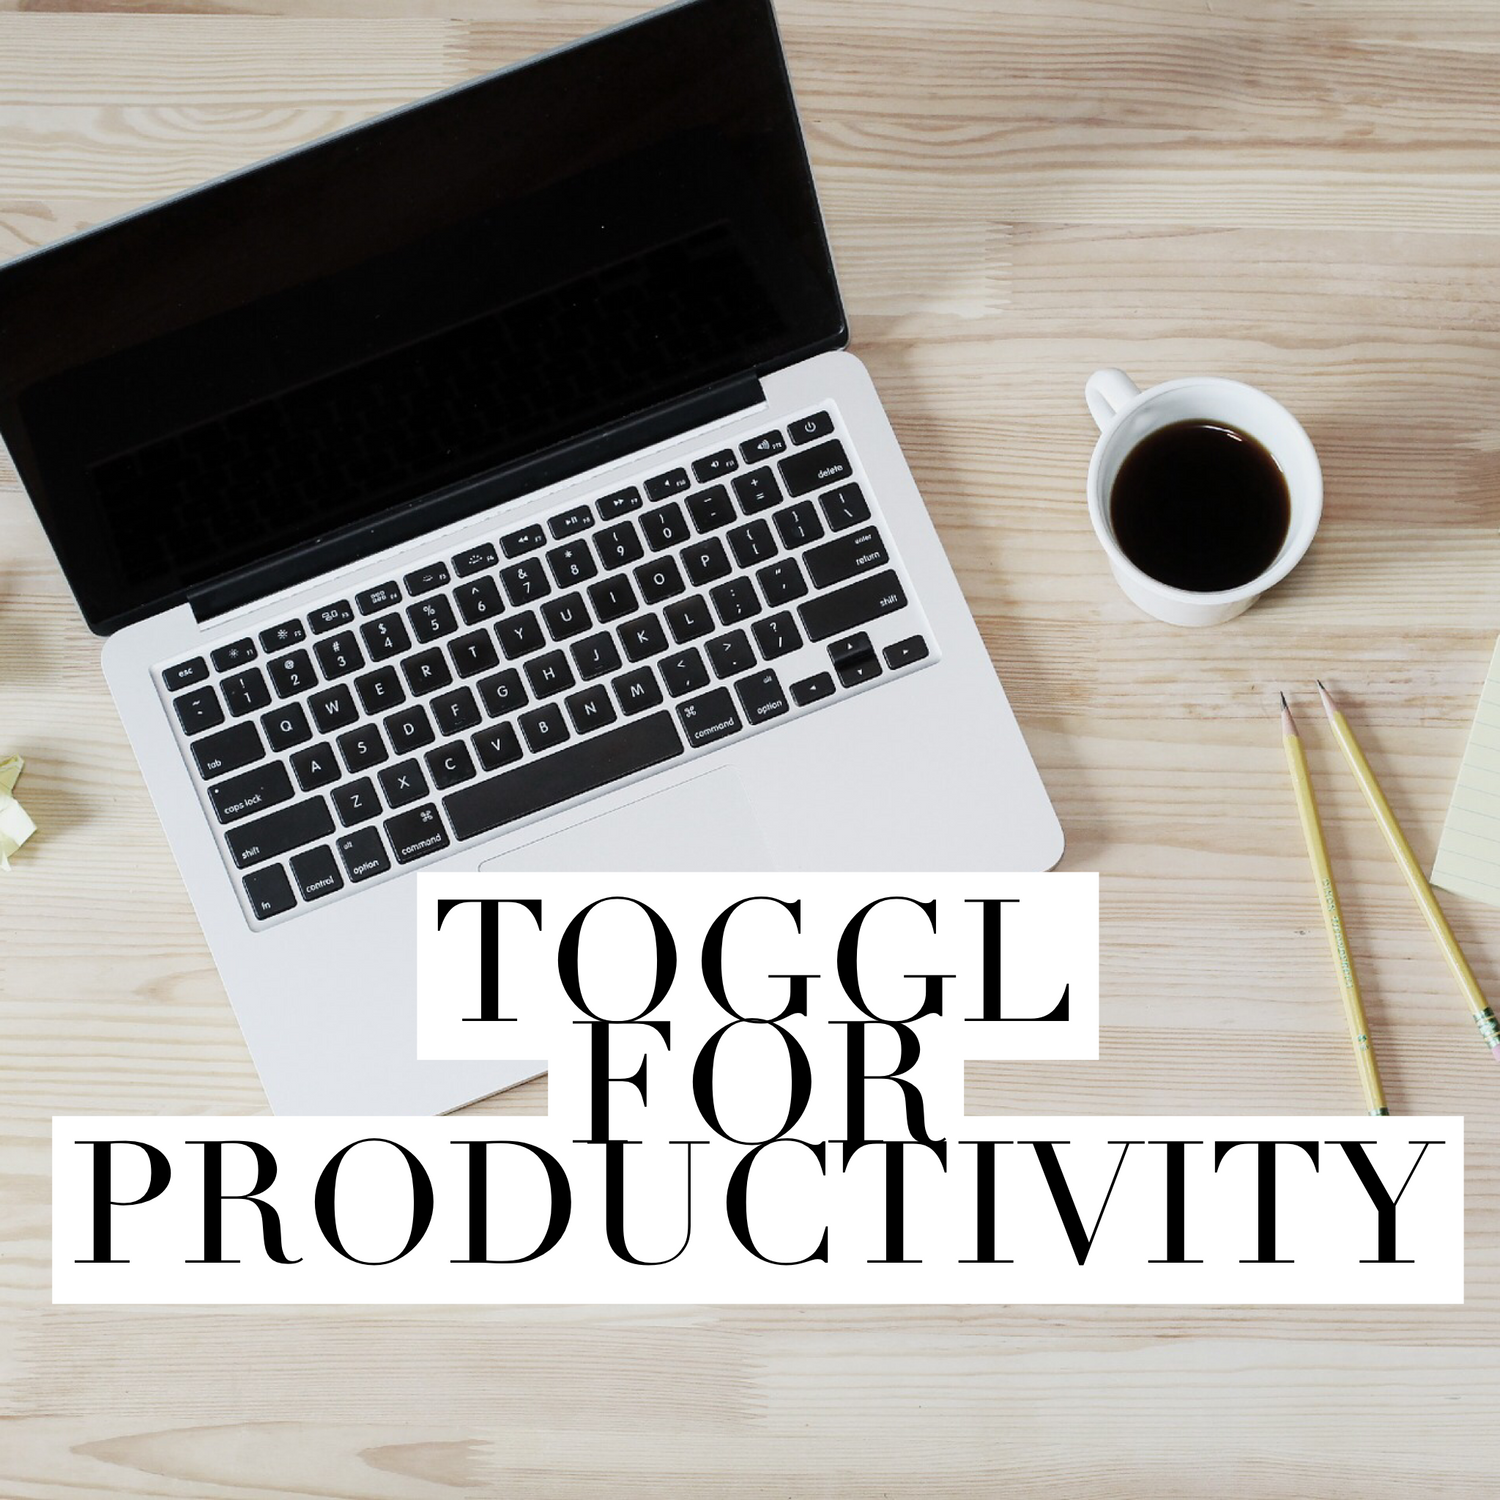 Increase Productivity Course - Day 4 - Toggl